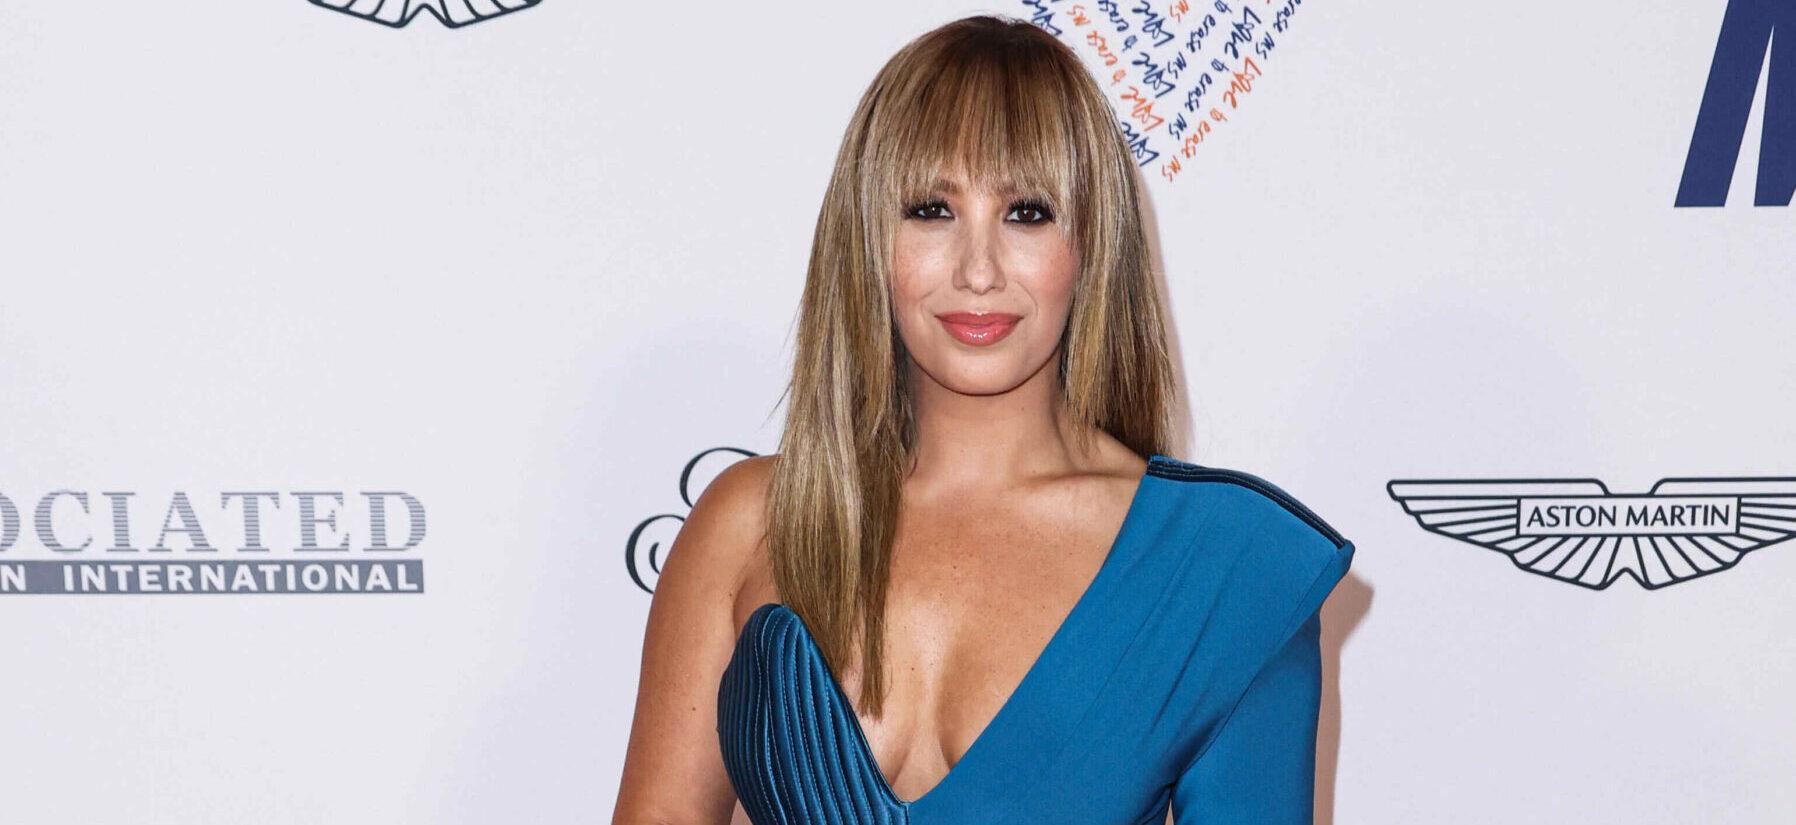 Cheryl Burke Opens Up About Family Loss & True Friendship In Mental Health Update